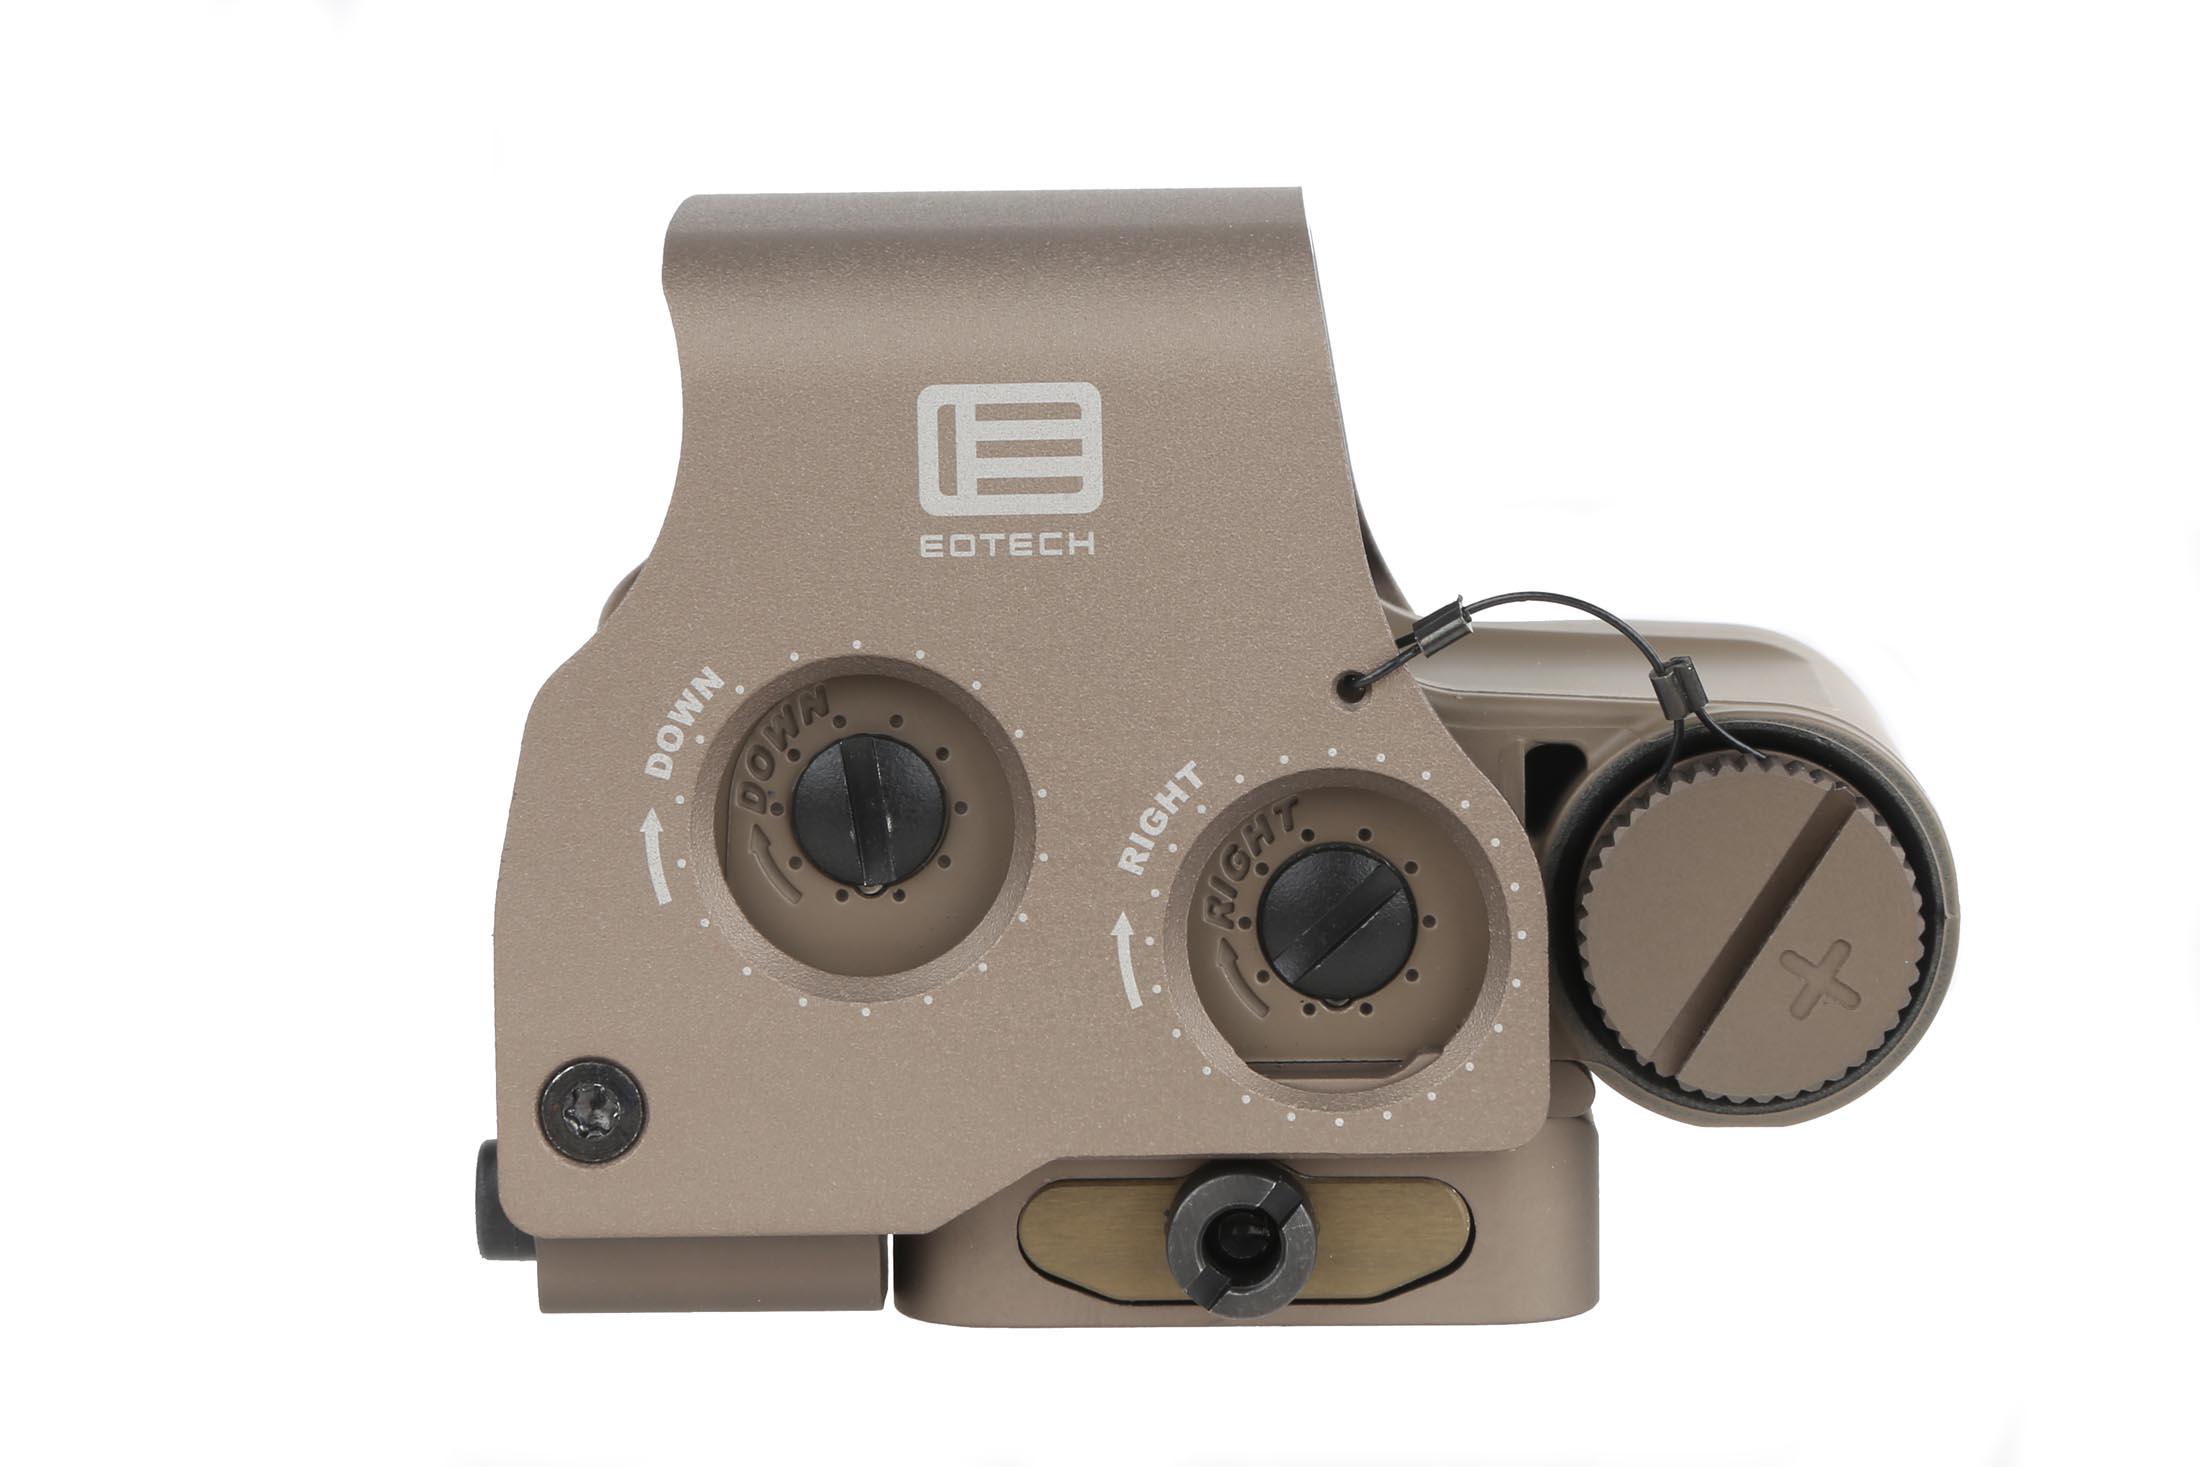 EOTECH EXPS3-0 Holographic Weapon Sight - Tan